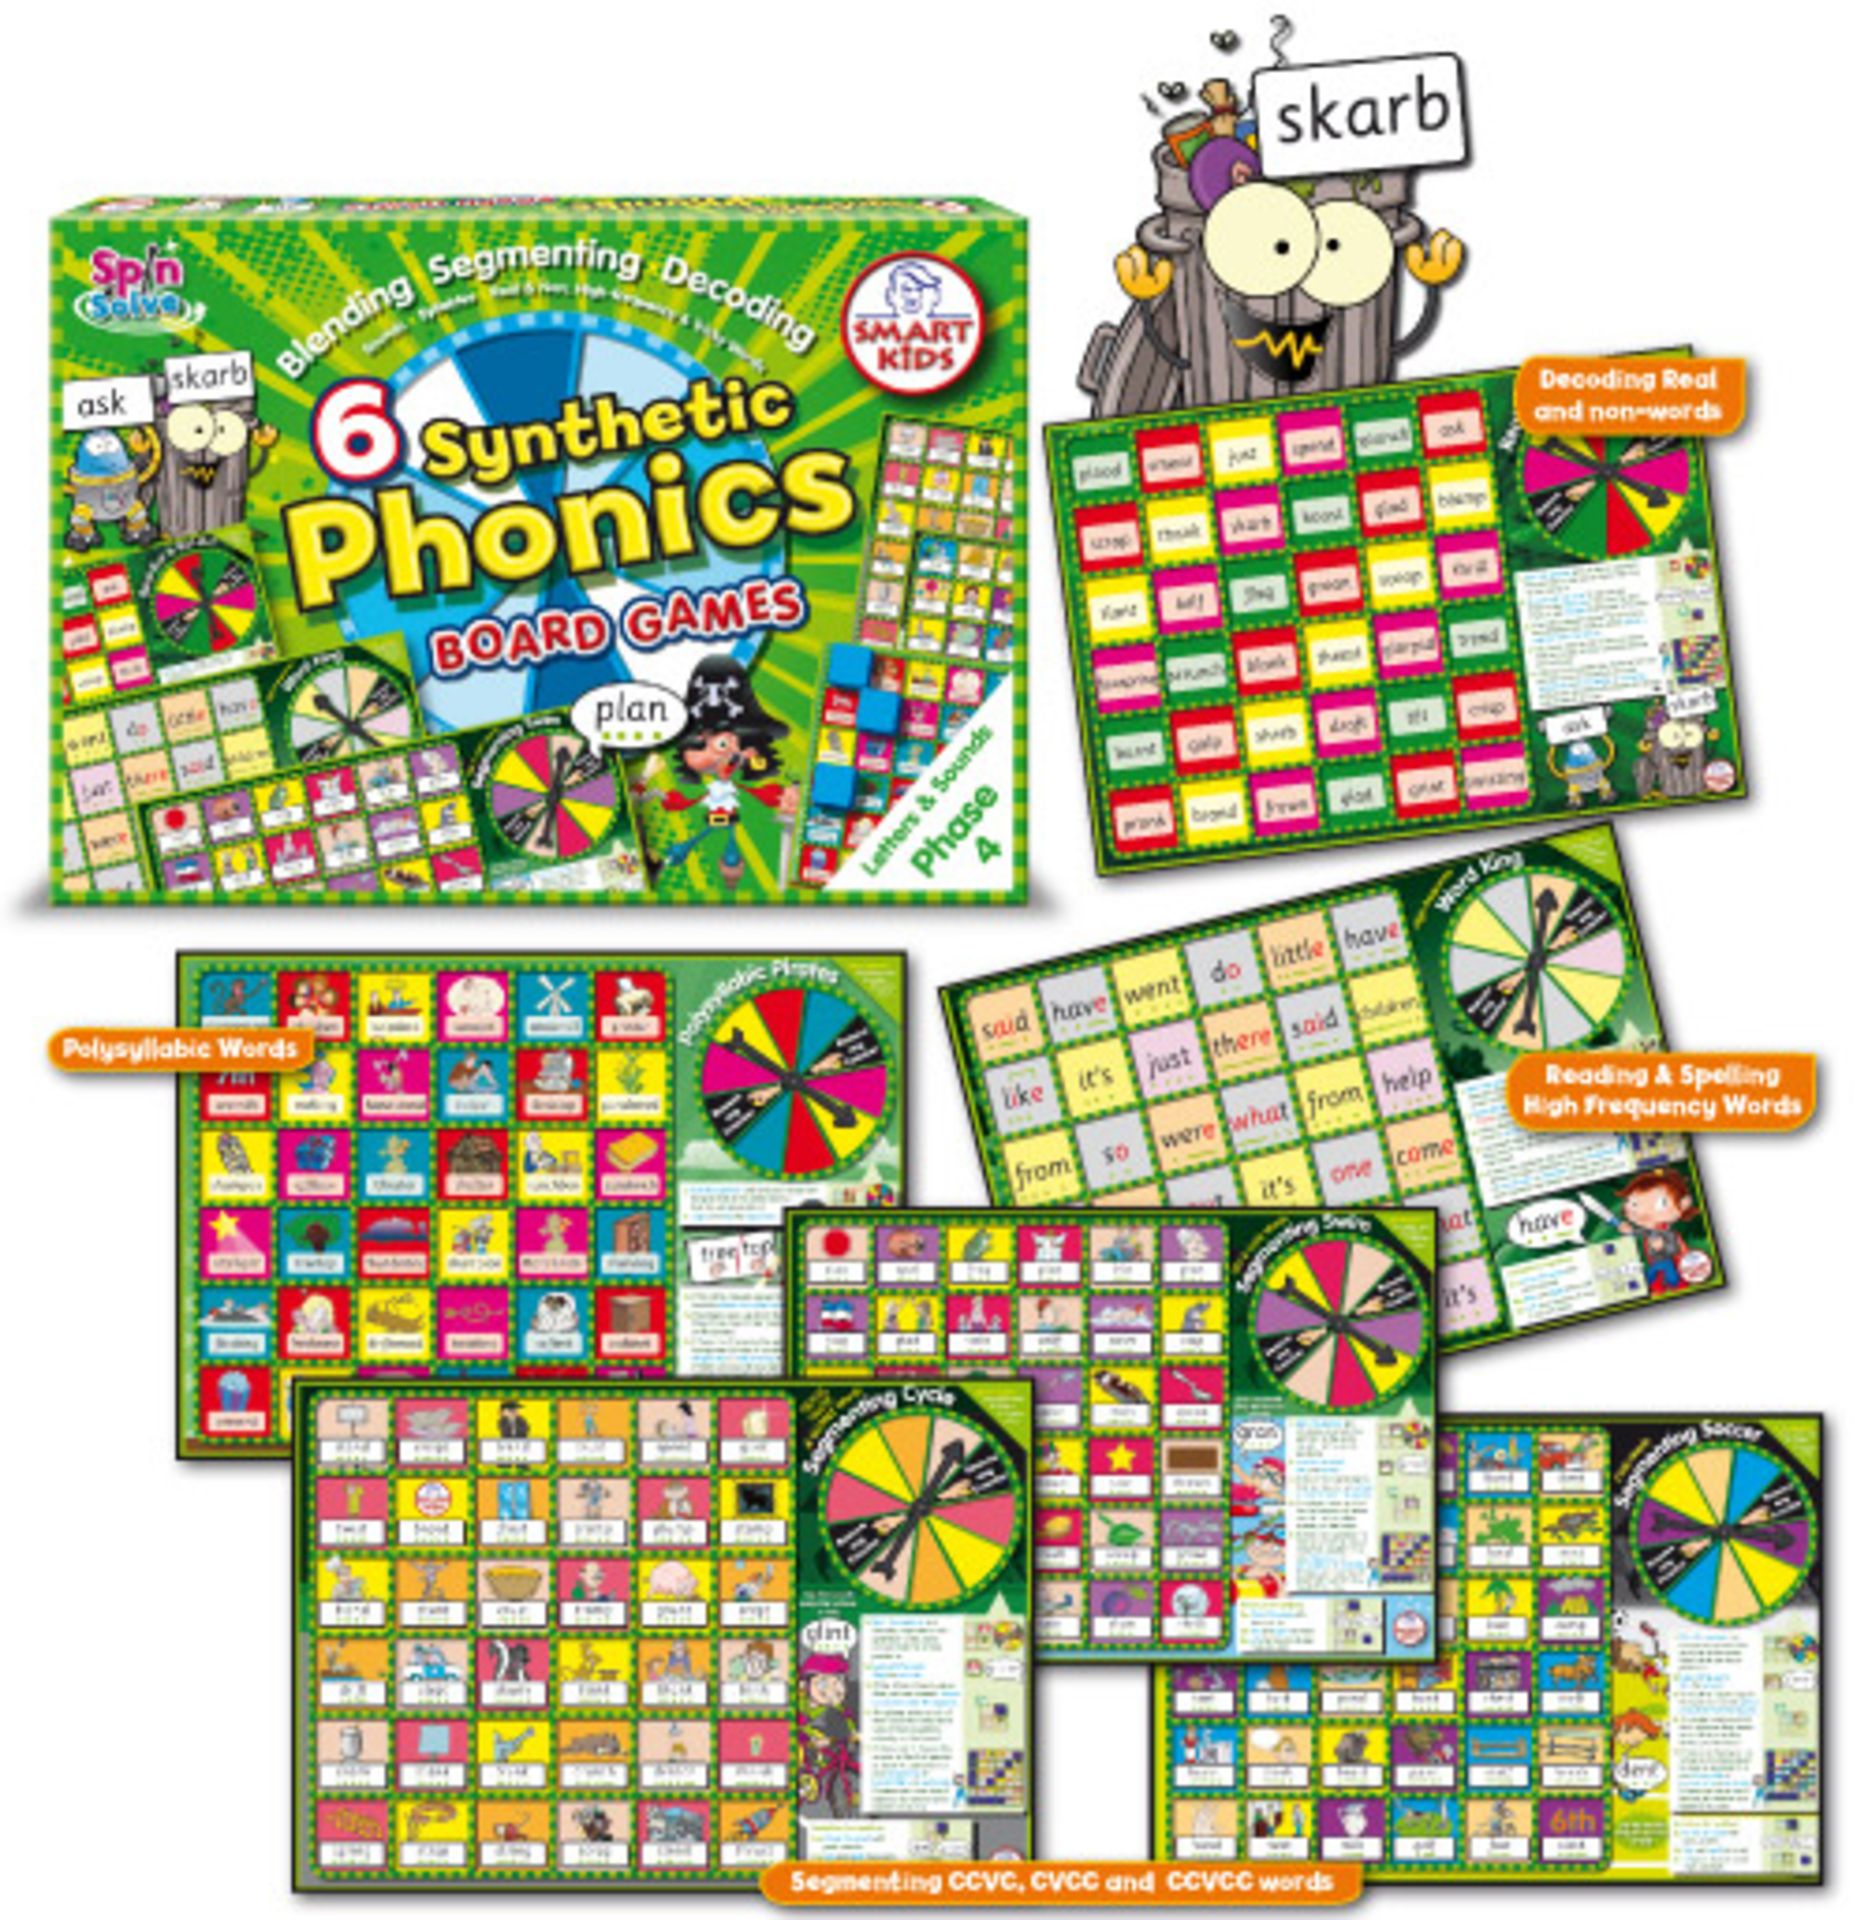 V Brand New Smart Kids Spin Solve 6 Synthetic Phonics Board Game ISP £34.80 (DTS) X 2 YOUR BID PRICE